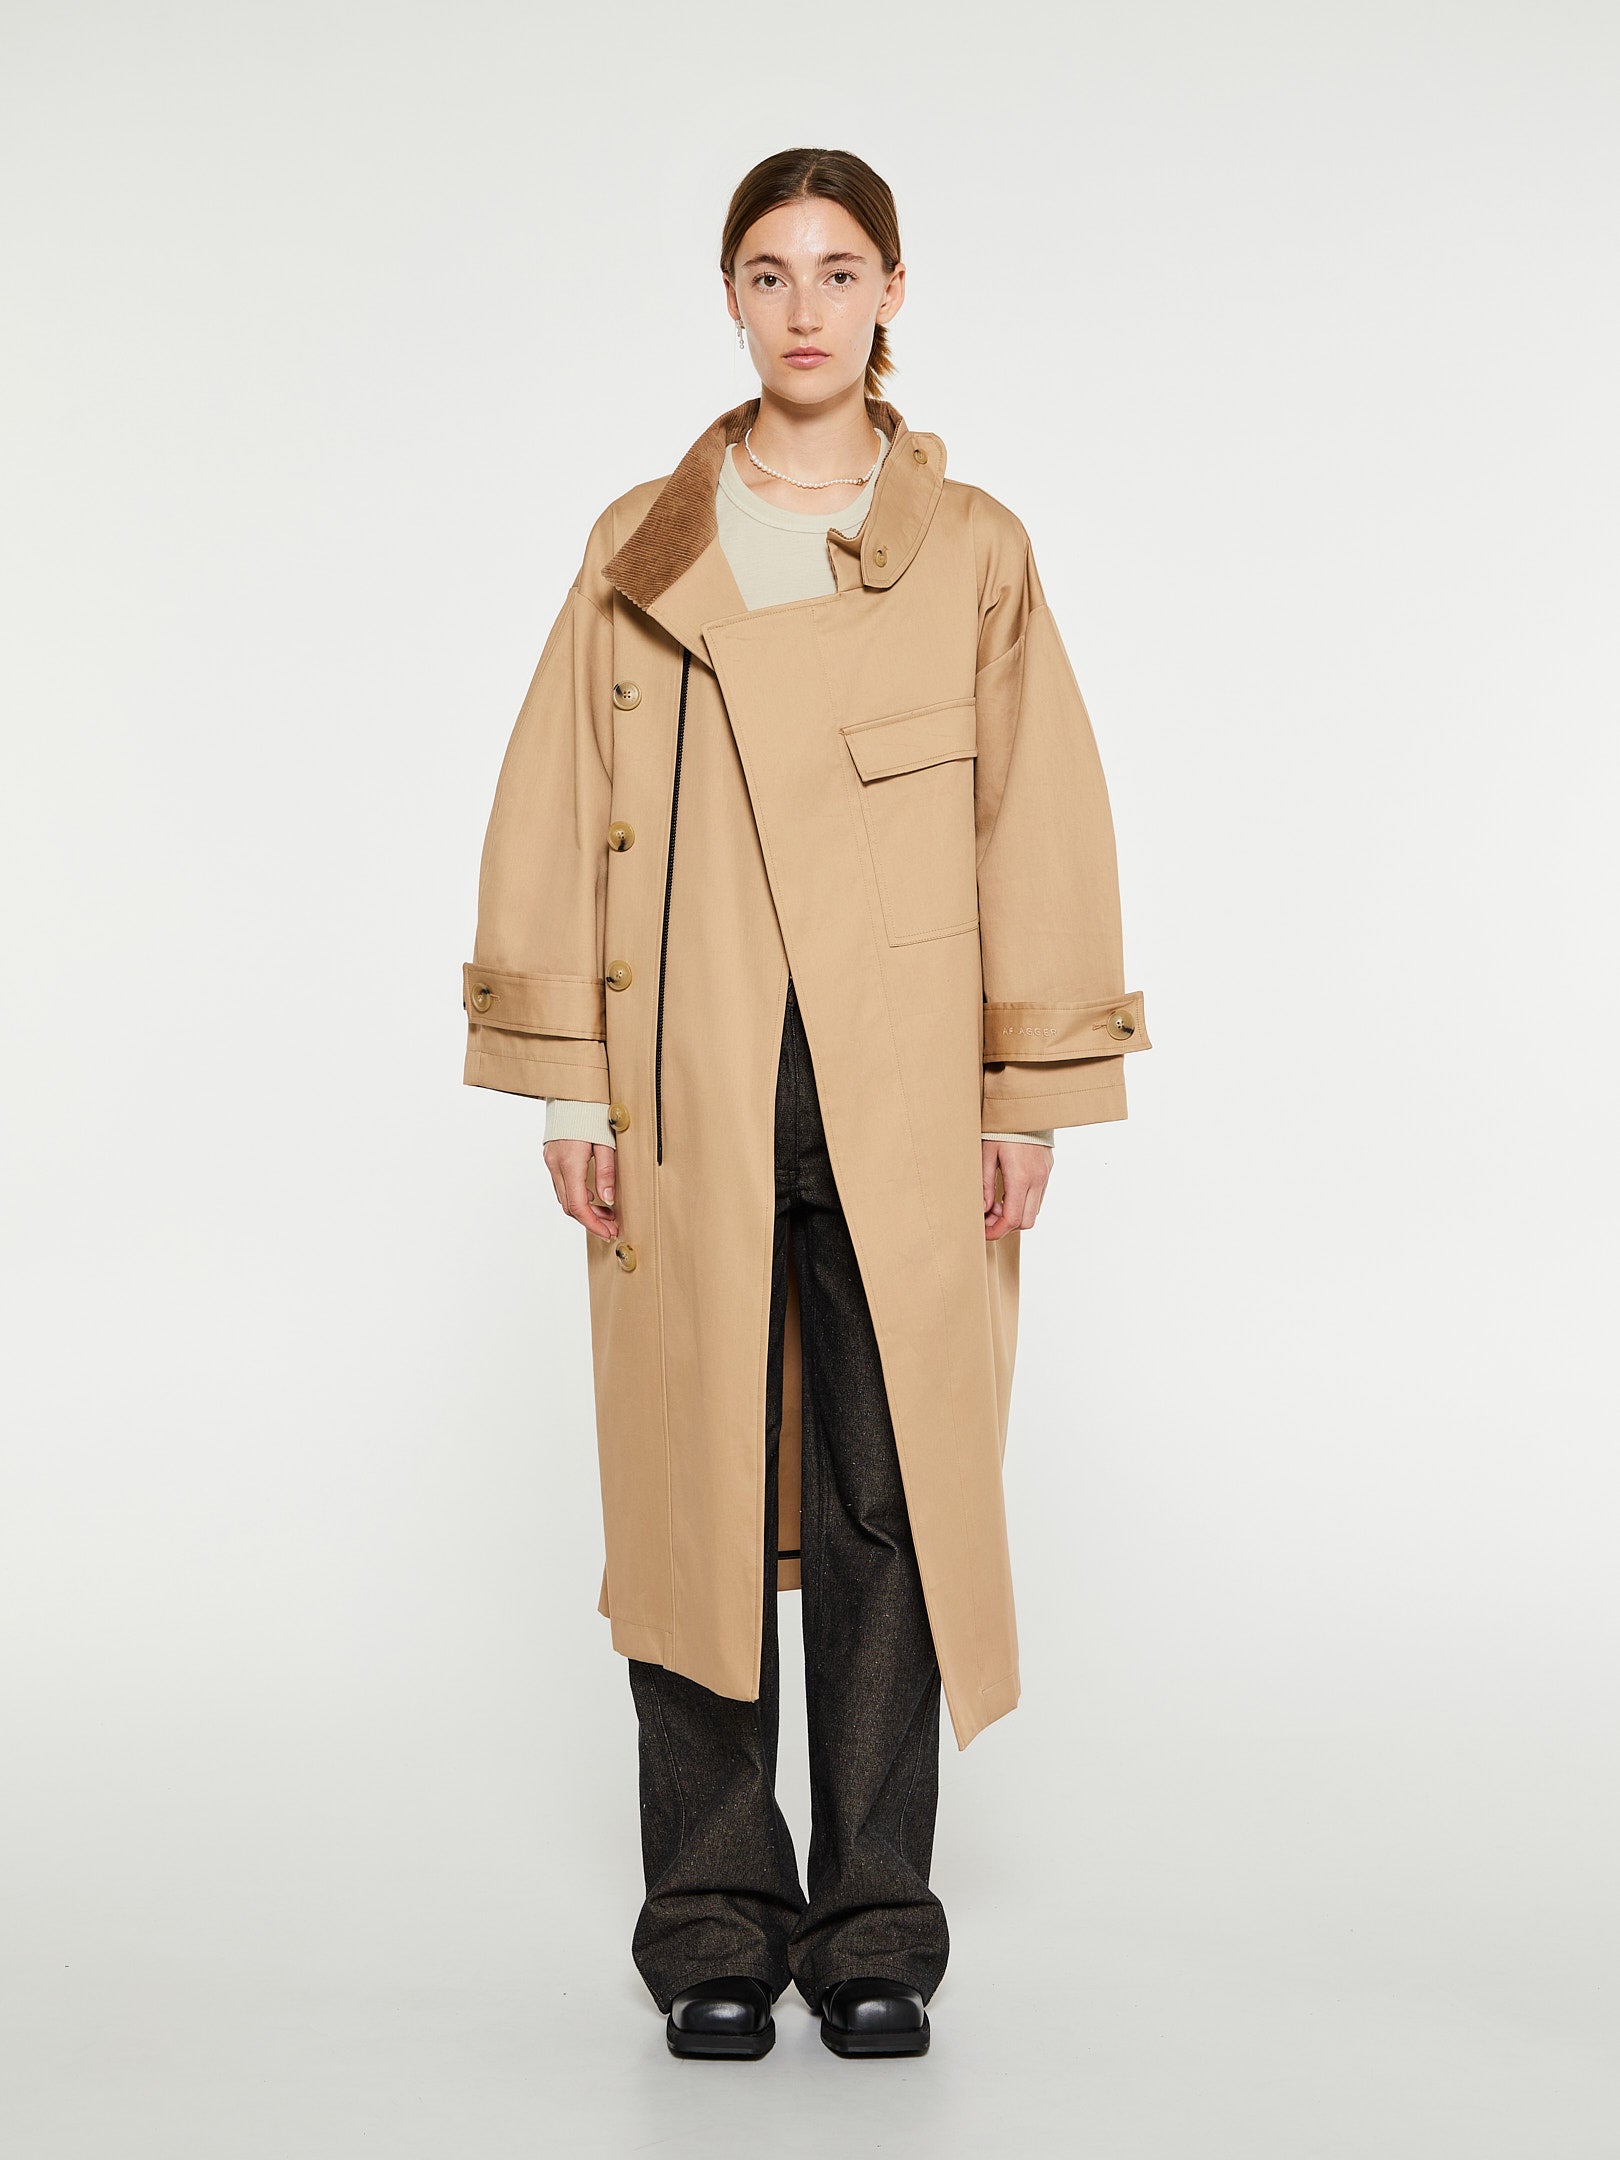 Coats at for Shop the & selection Jackets women stoy |